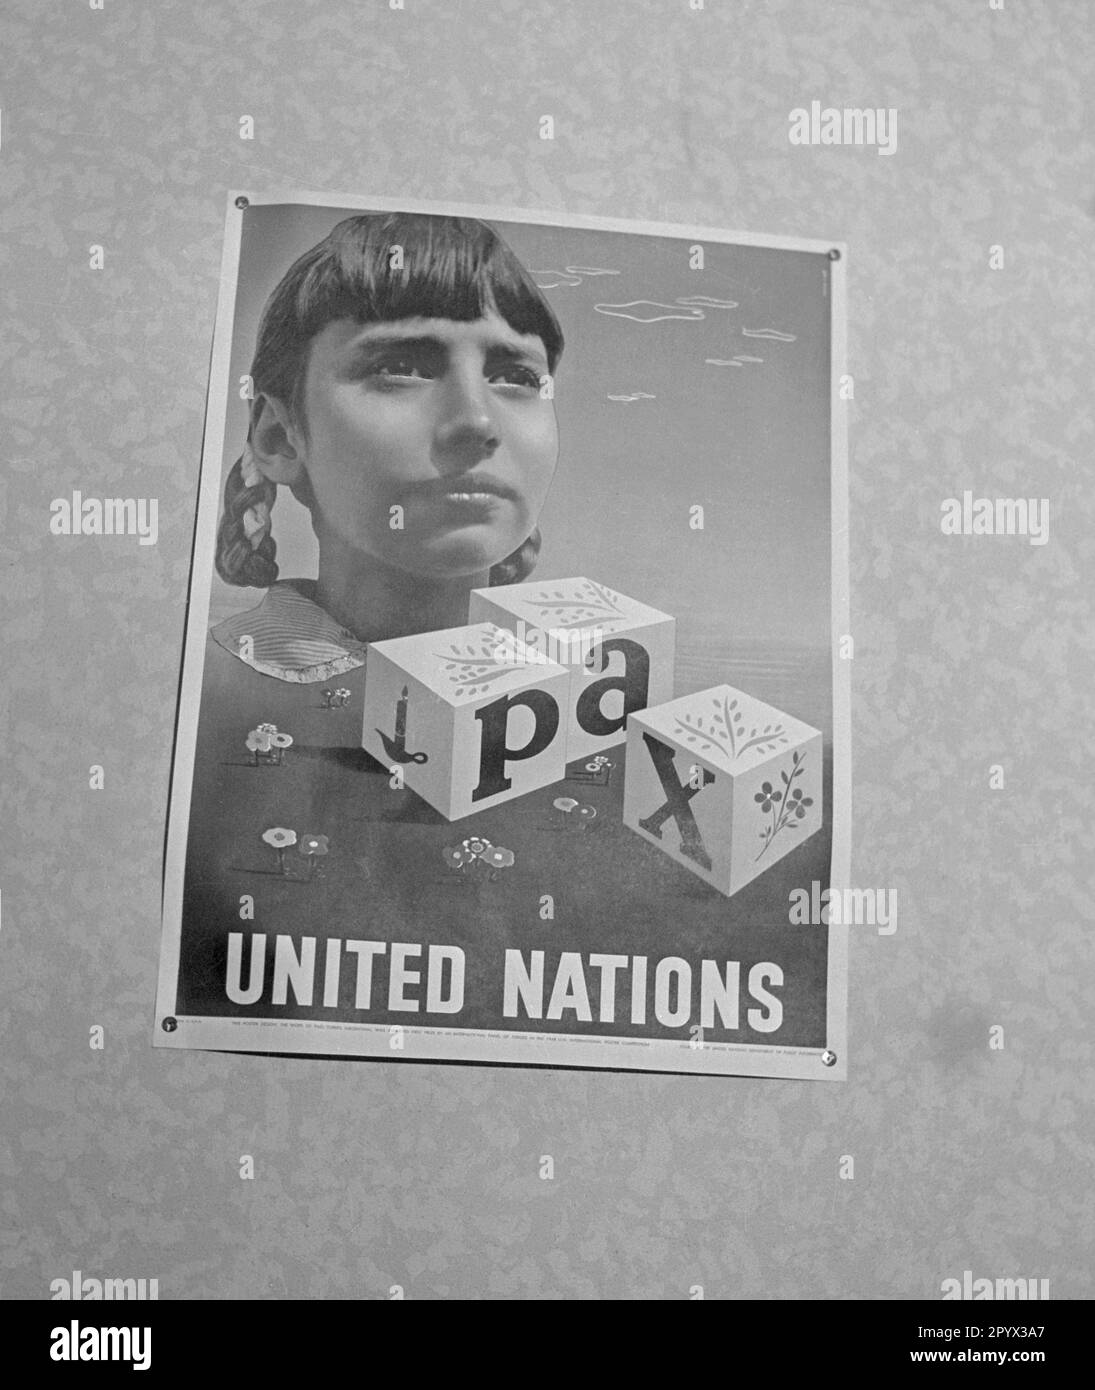 'United Nations poster promoting peace (''Pax''). Undated photo.' Stock Photo